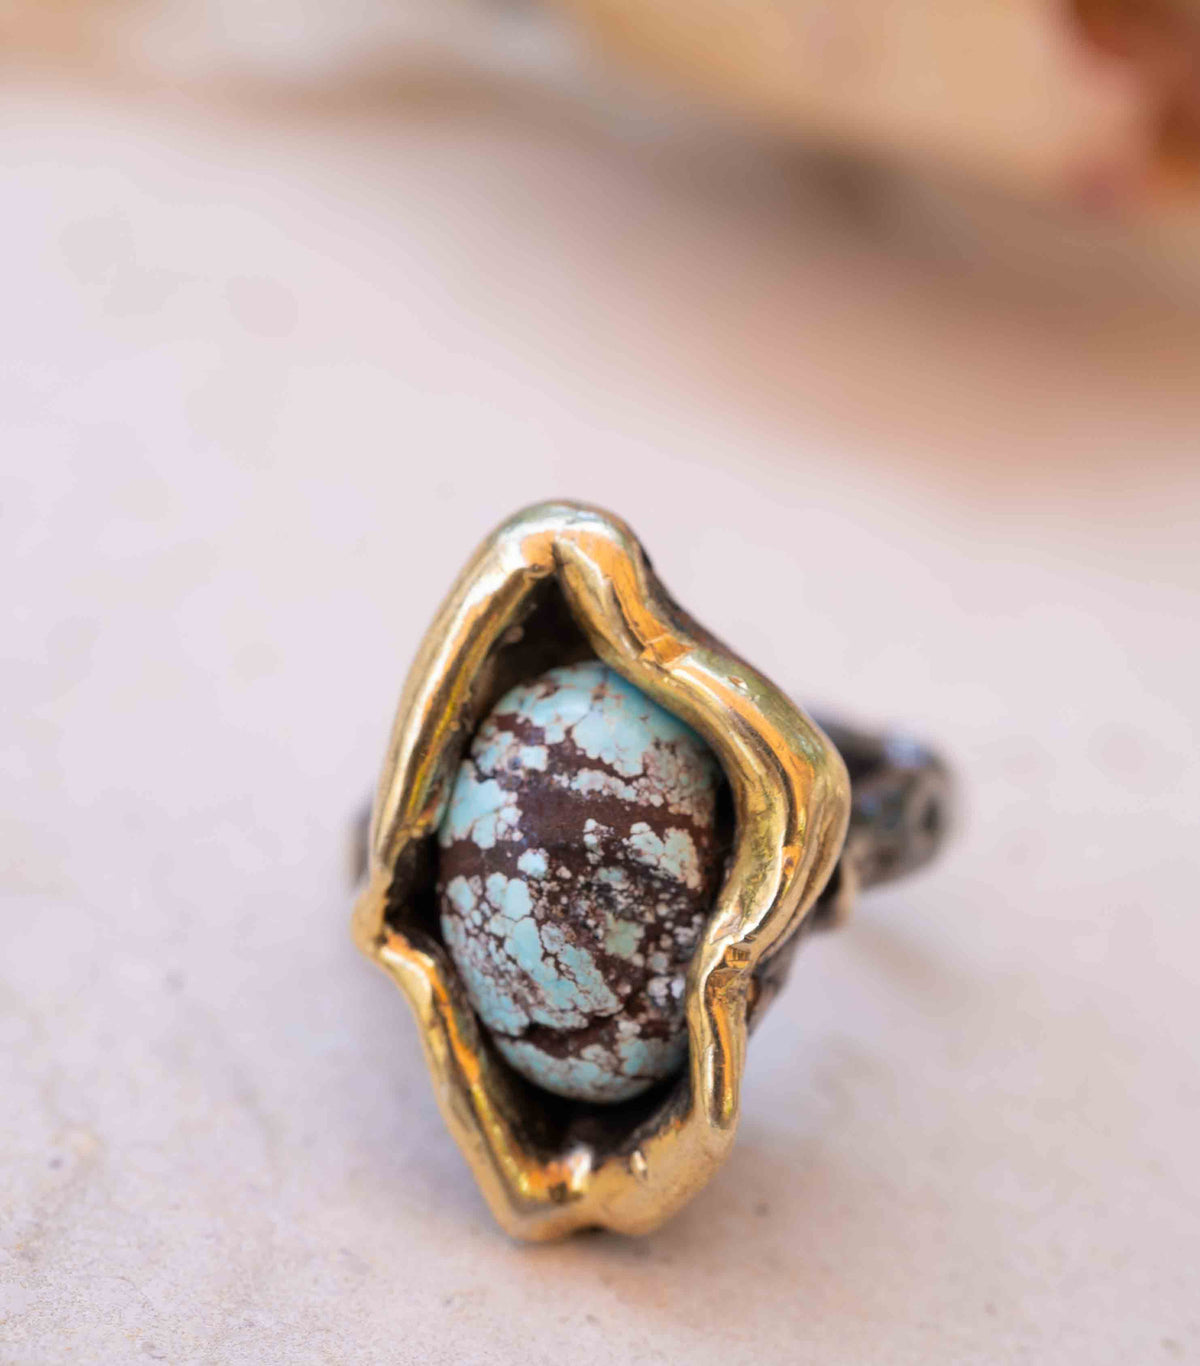 Irmak Ring * Turquoise * Sterling Silver 925 *SBJR042